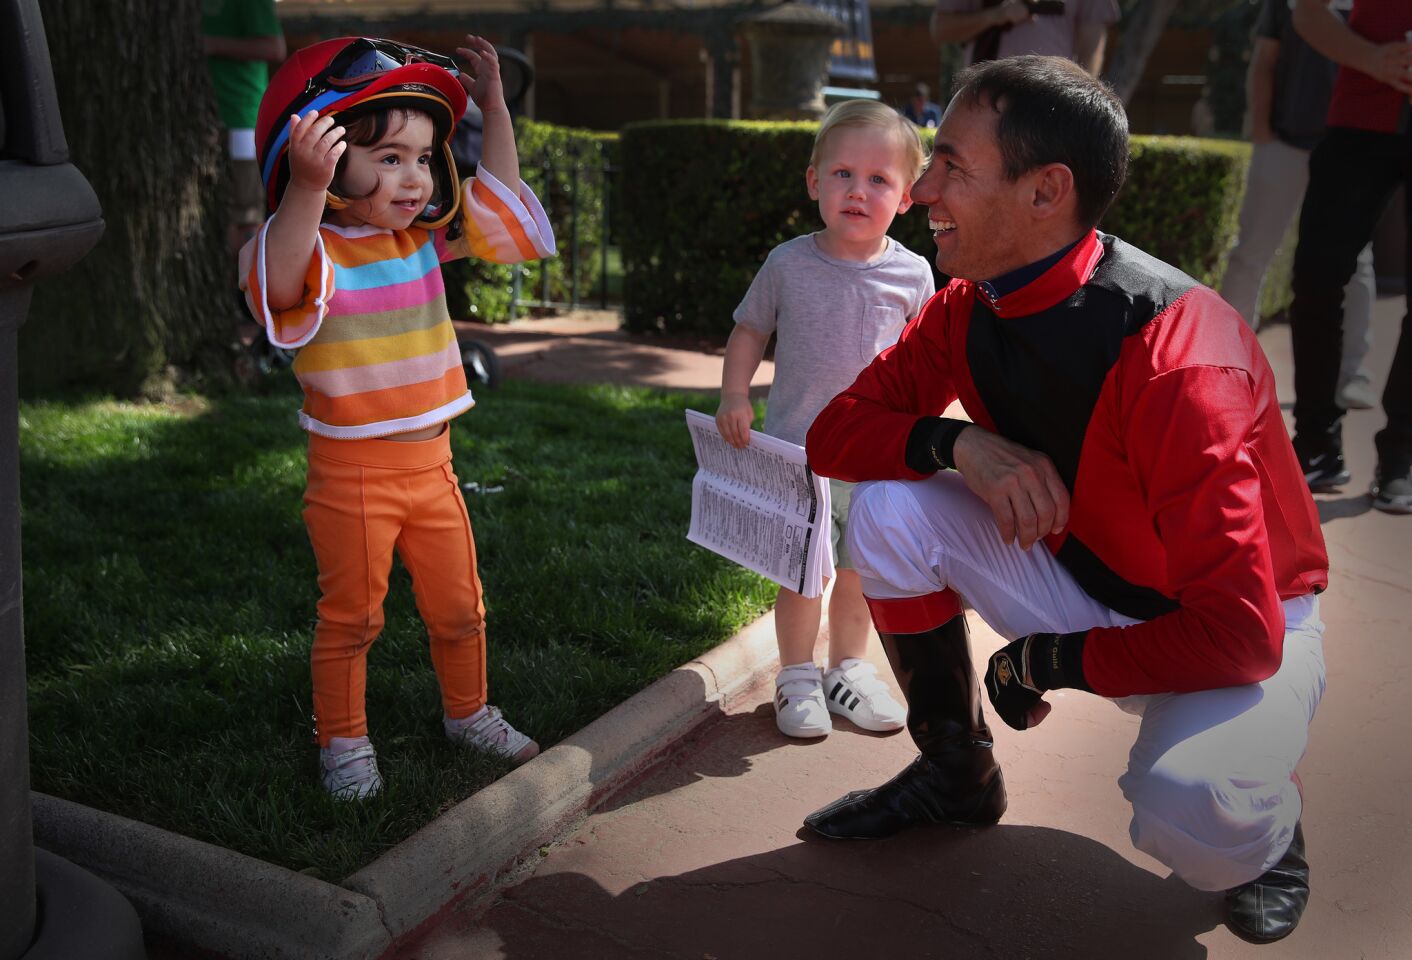 Valentina Pereira, 2, left, tries on her dad's jockey helmet, Tiago Pereira, right, before his race as Vincent Talamo, 2, watches while holding a racing program as Santa Anita resumes racing at Santa Anita Horse Park in Arcadia, Calif., on March 29, 2019. (Allen J. Schaben / Los Angeles Times)